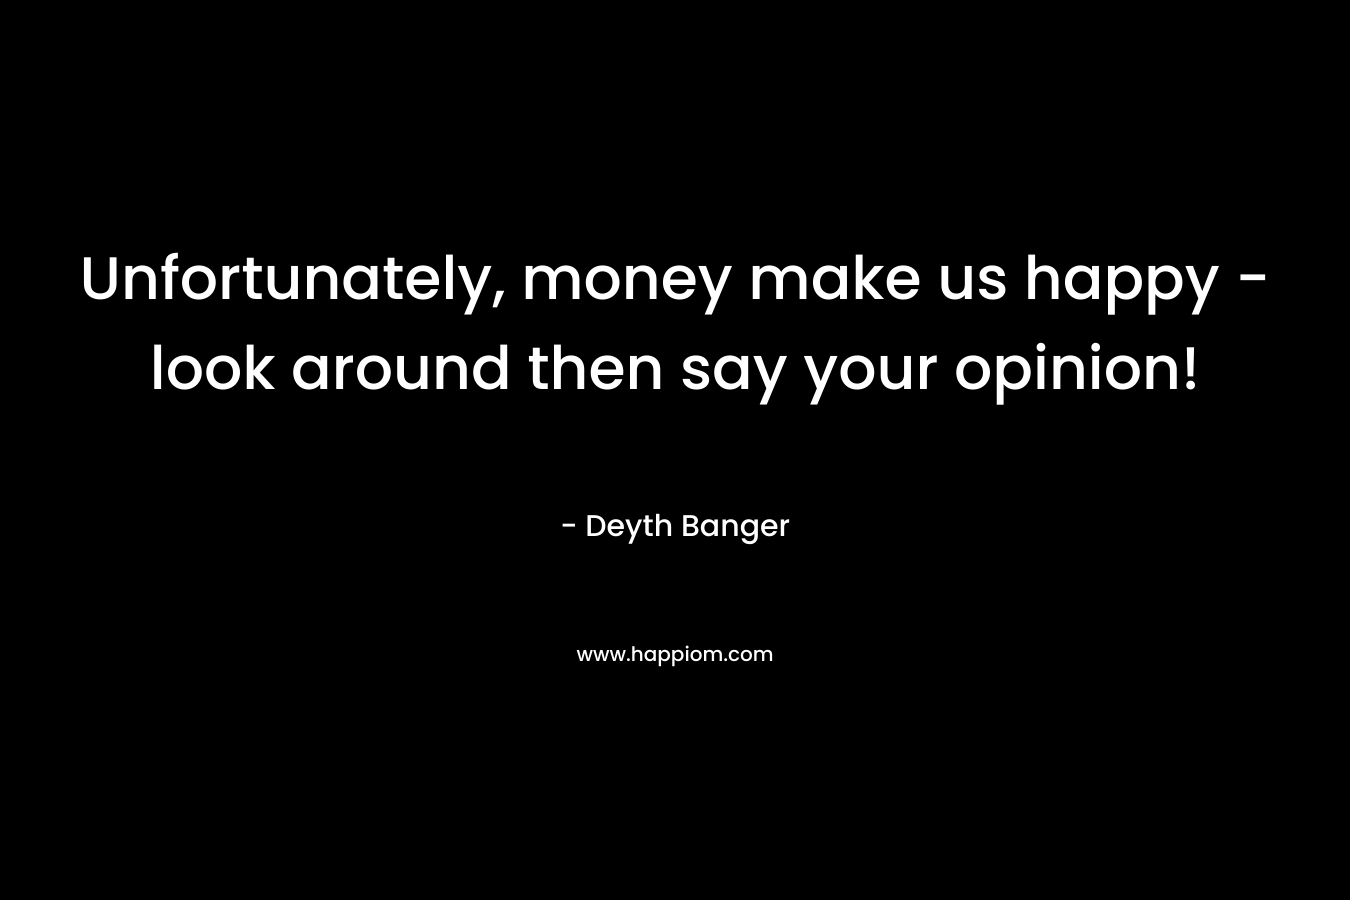 Unfortunately, money make us happy - look around then say your opinion!